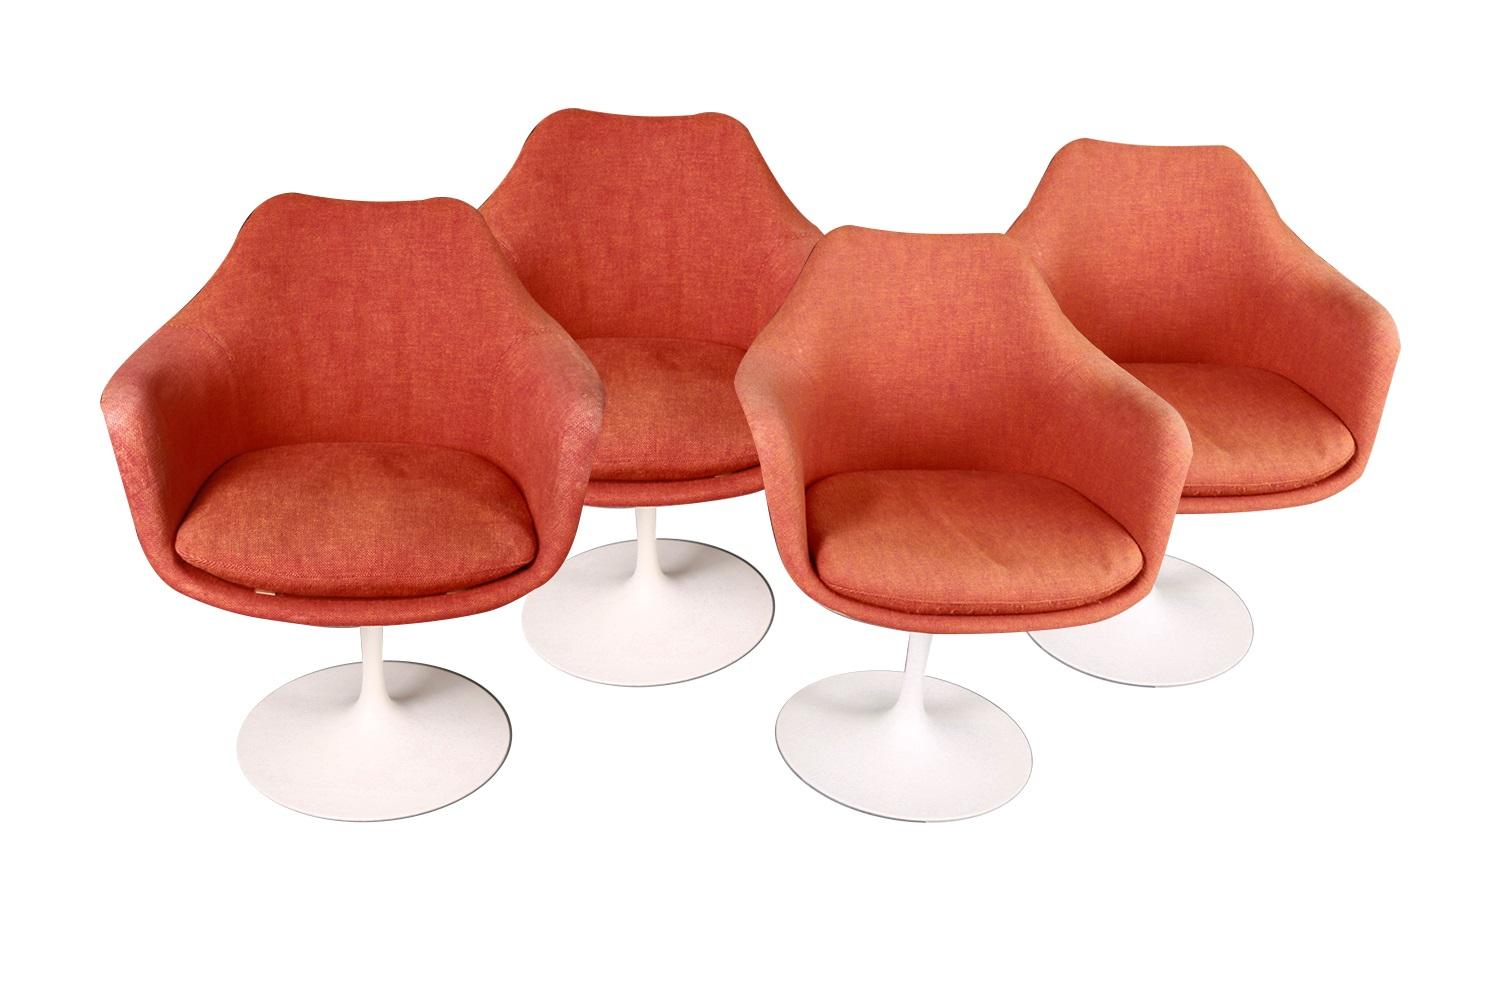 Classic mid-century modern set of four tulip swivel, armchairs, side, dining chairs, for Knoll designed by Eero Saarinen (USA). Features molded white lacquered fiberglass form resting on cast aluminum swivel base with original knoll removable seat